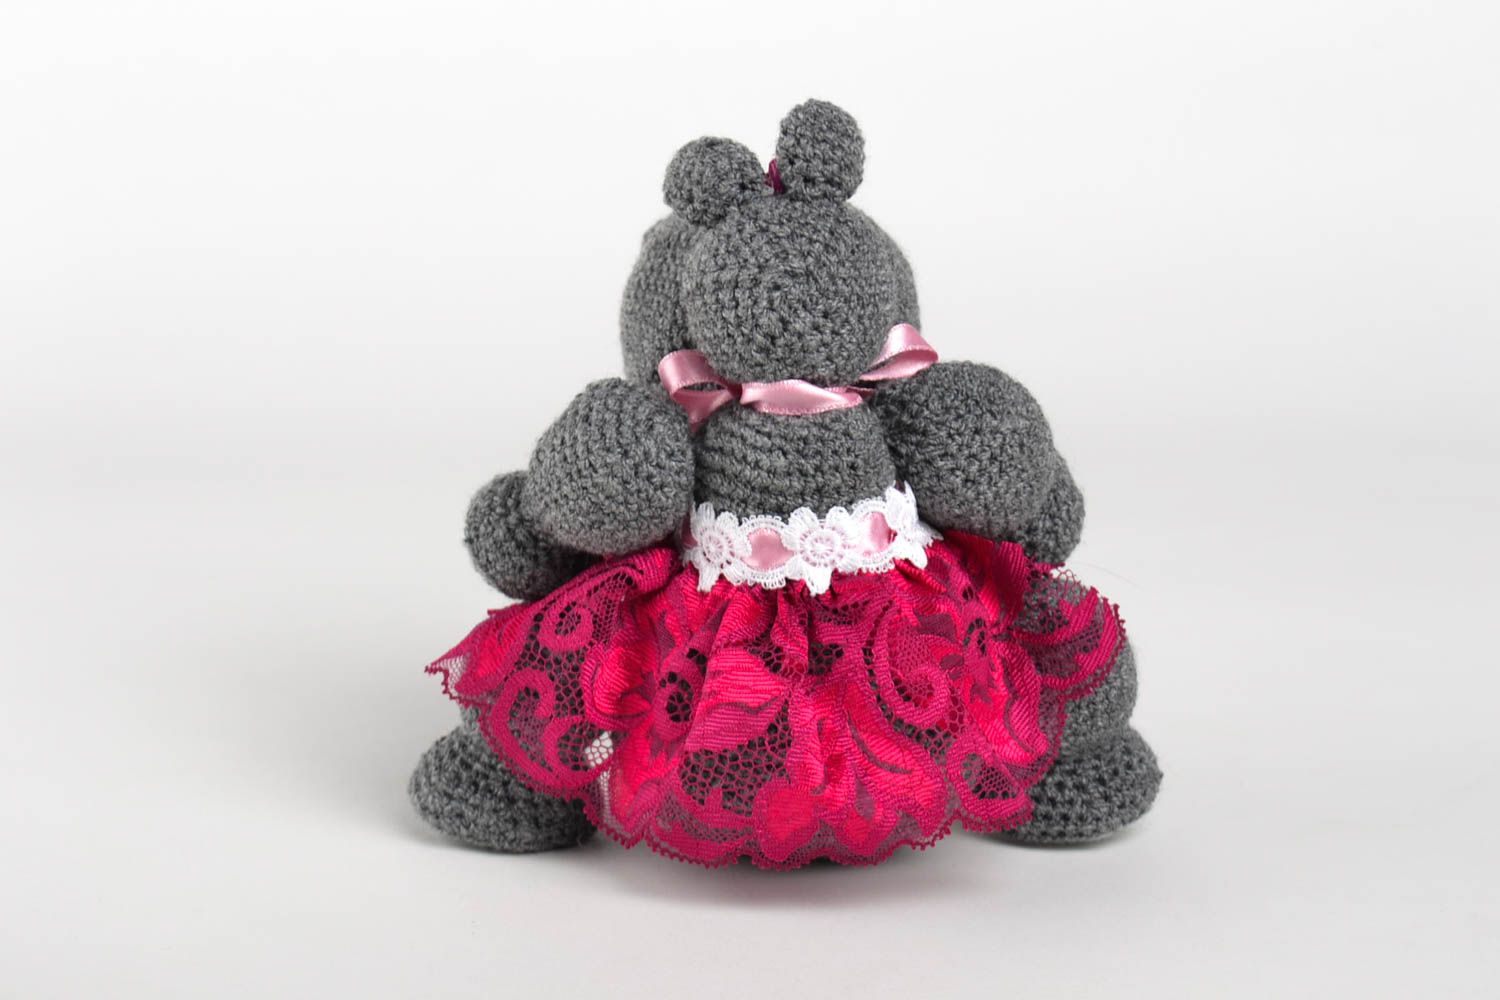 Crocheted soft toy hand-crocheted stuffed toy for babies home decor ideas photo 5